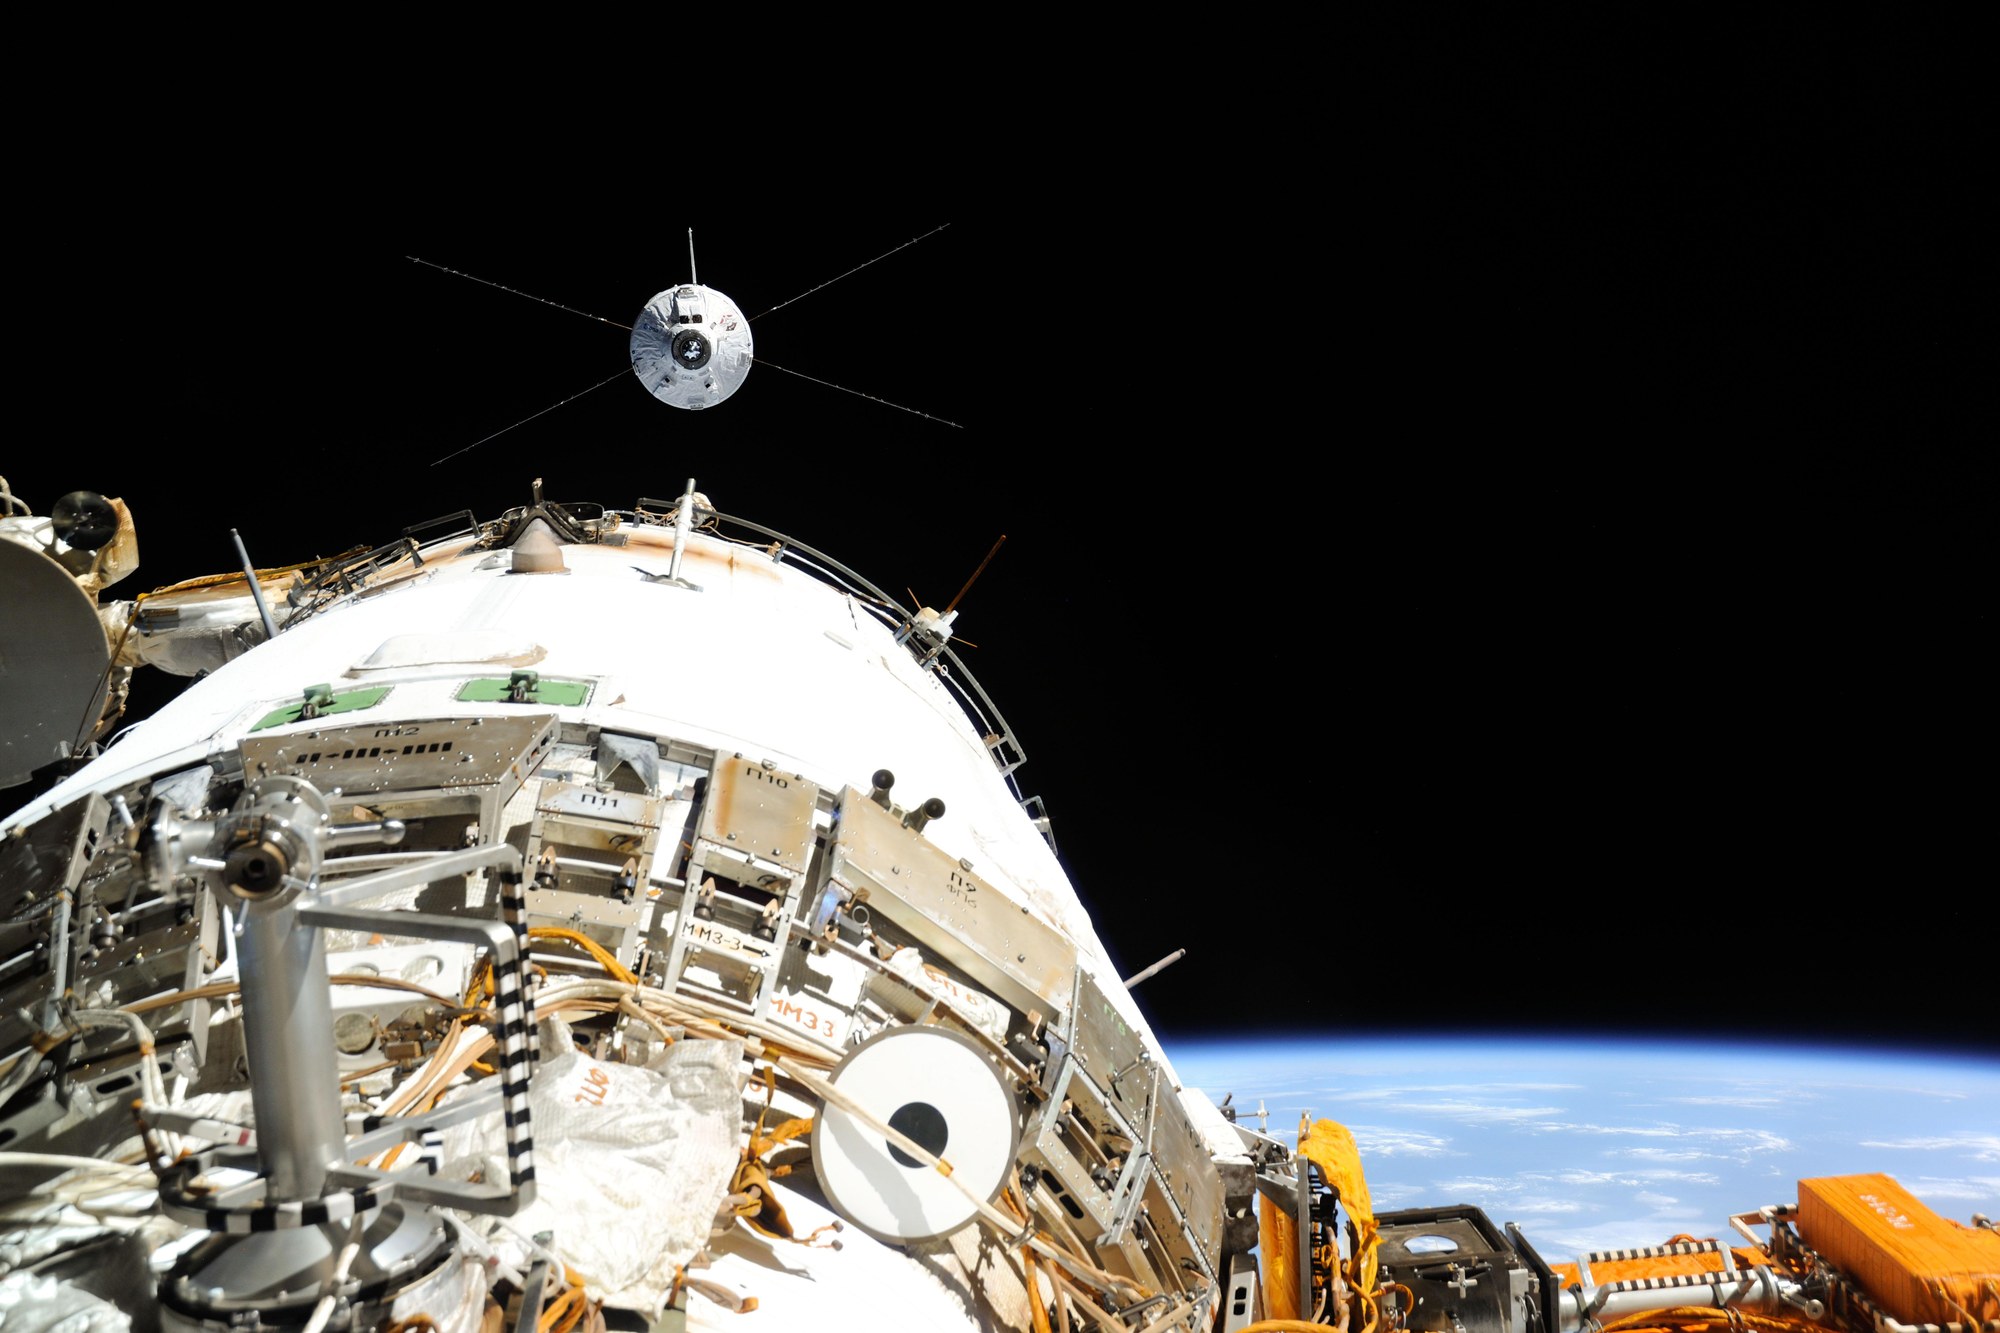 ATV-4 docked to the ISS